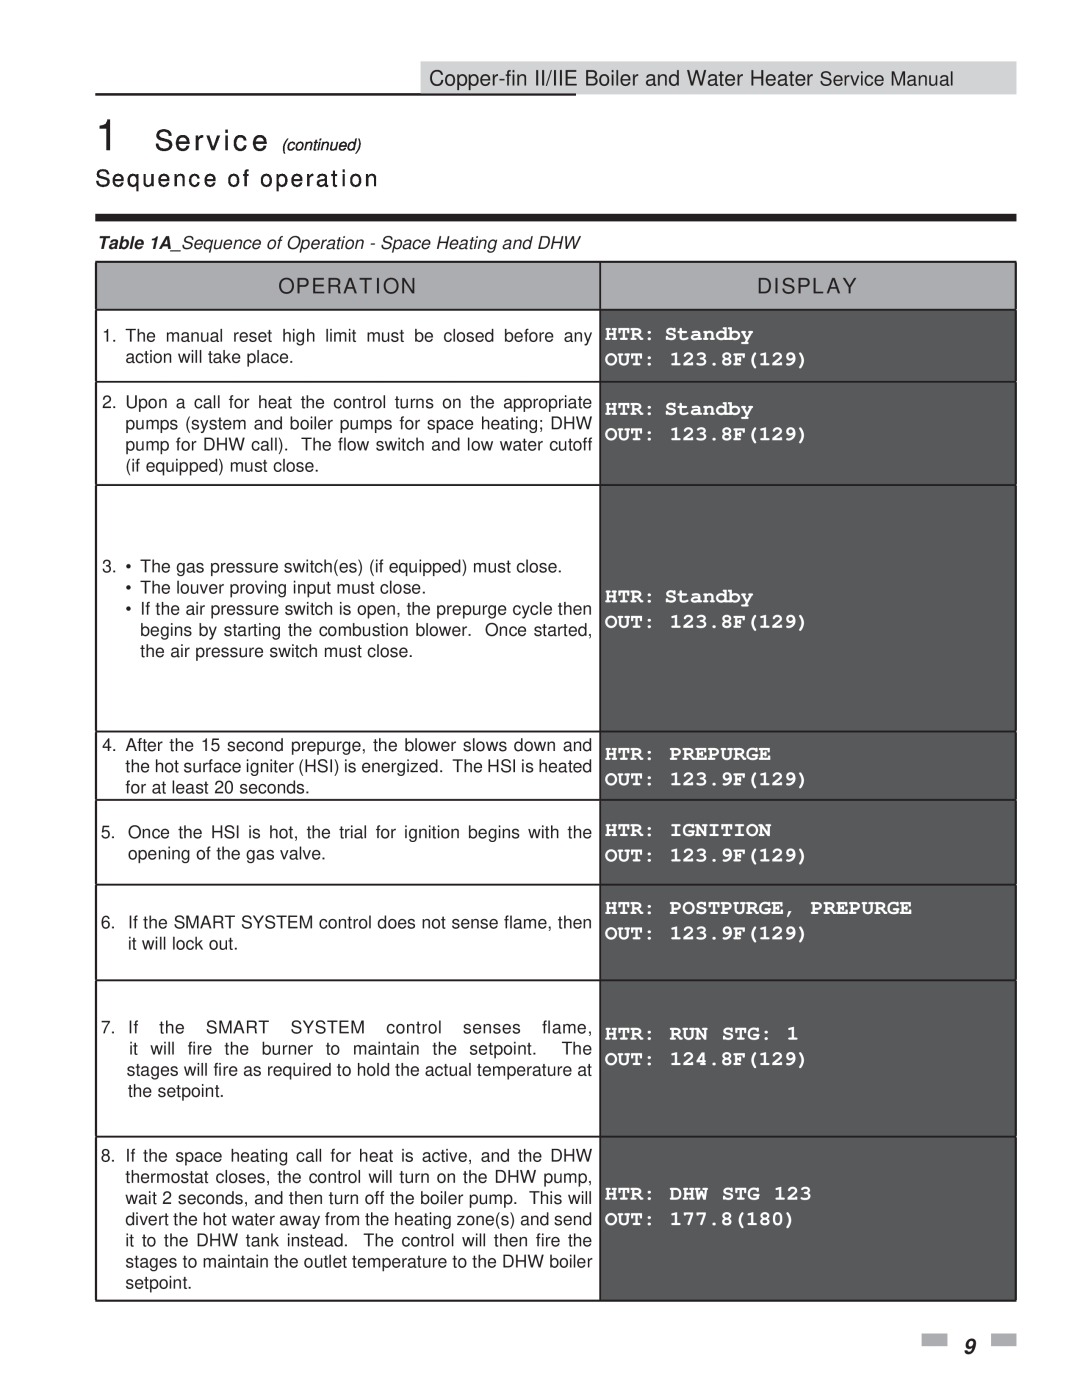 Lochinvar 402 - 2072 service manual Sequence of operation, Operation, Display 